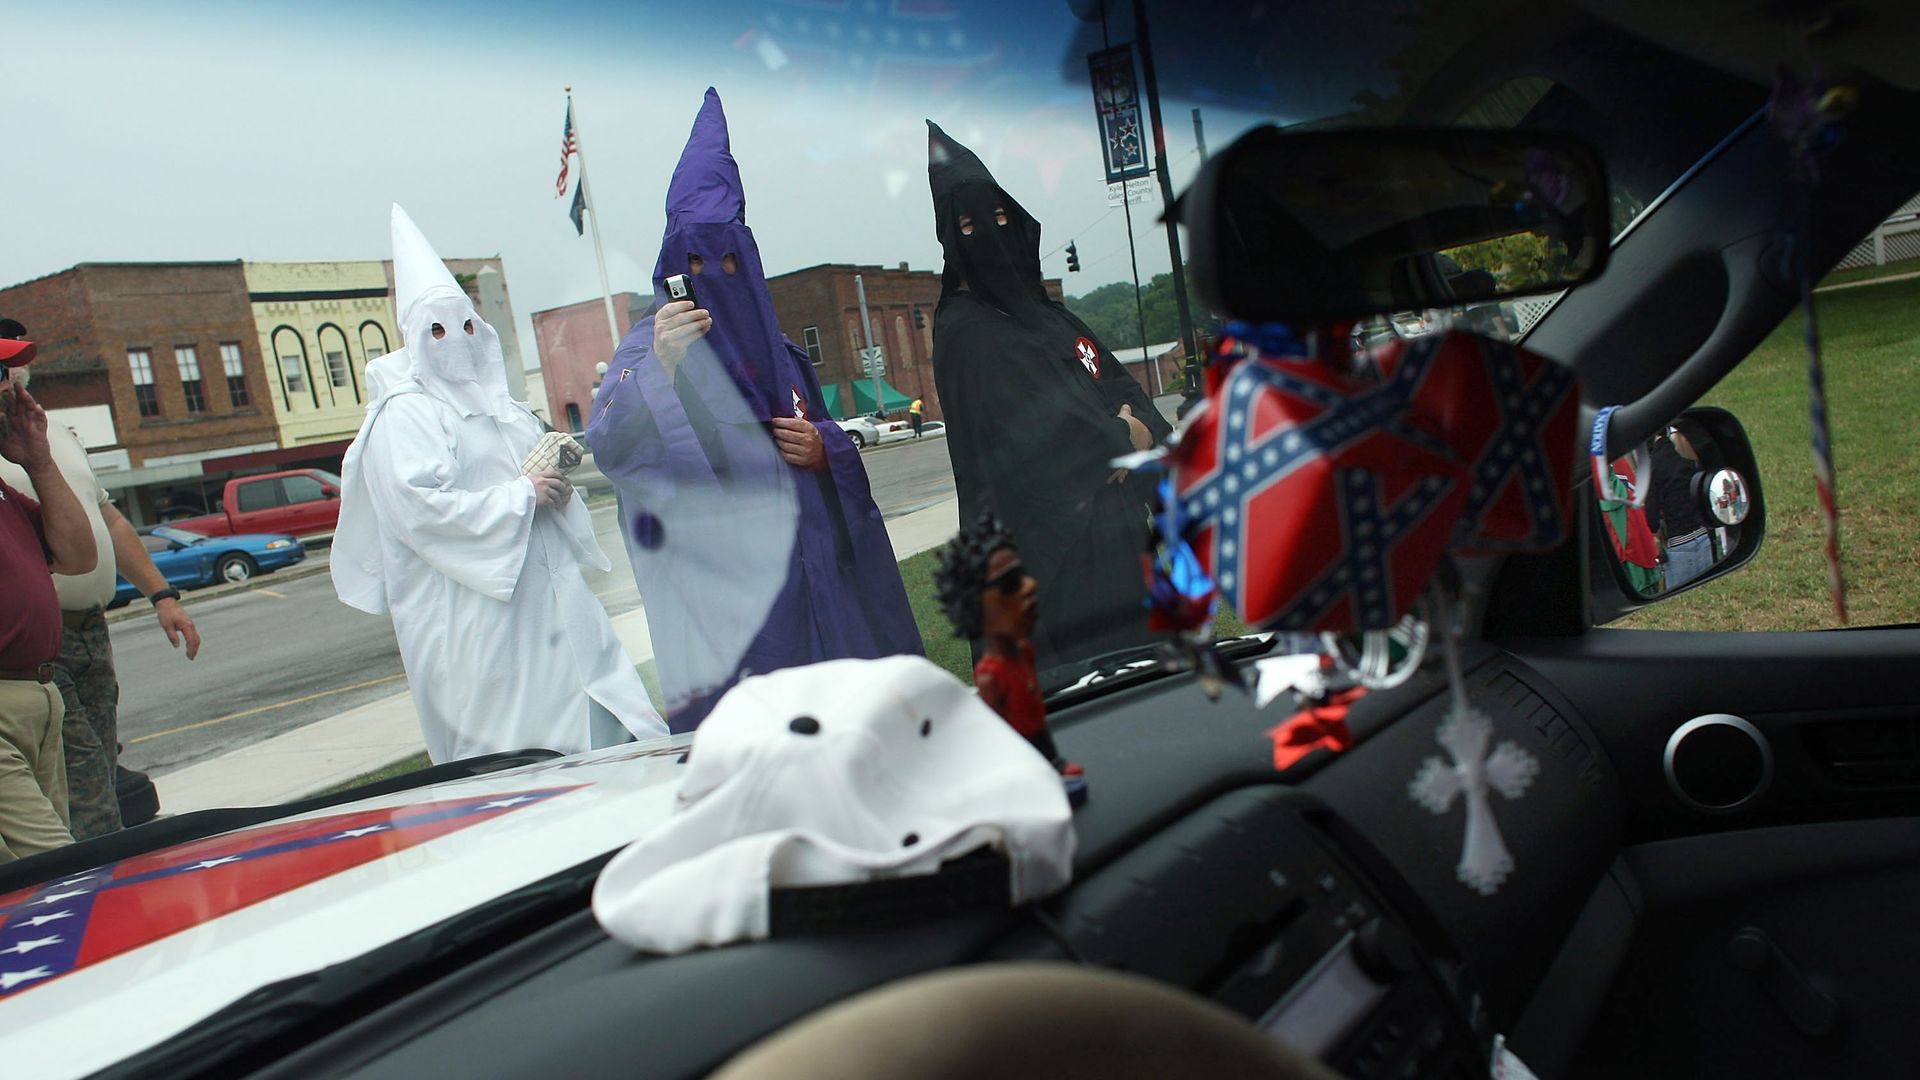 Members of the Fraternal White Knights of the Ku Klux Klan participate in the 11th Annual Nathan Bedford Forrest Birthday march July 11, 2009 in Pulaski, Tennessee. 